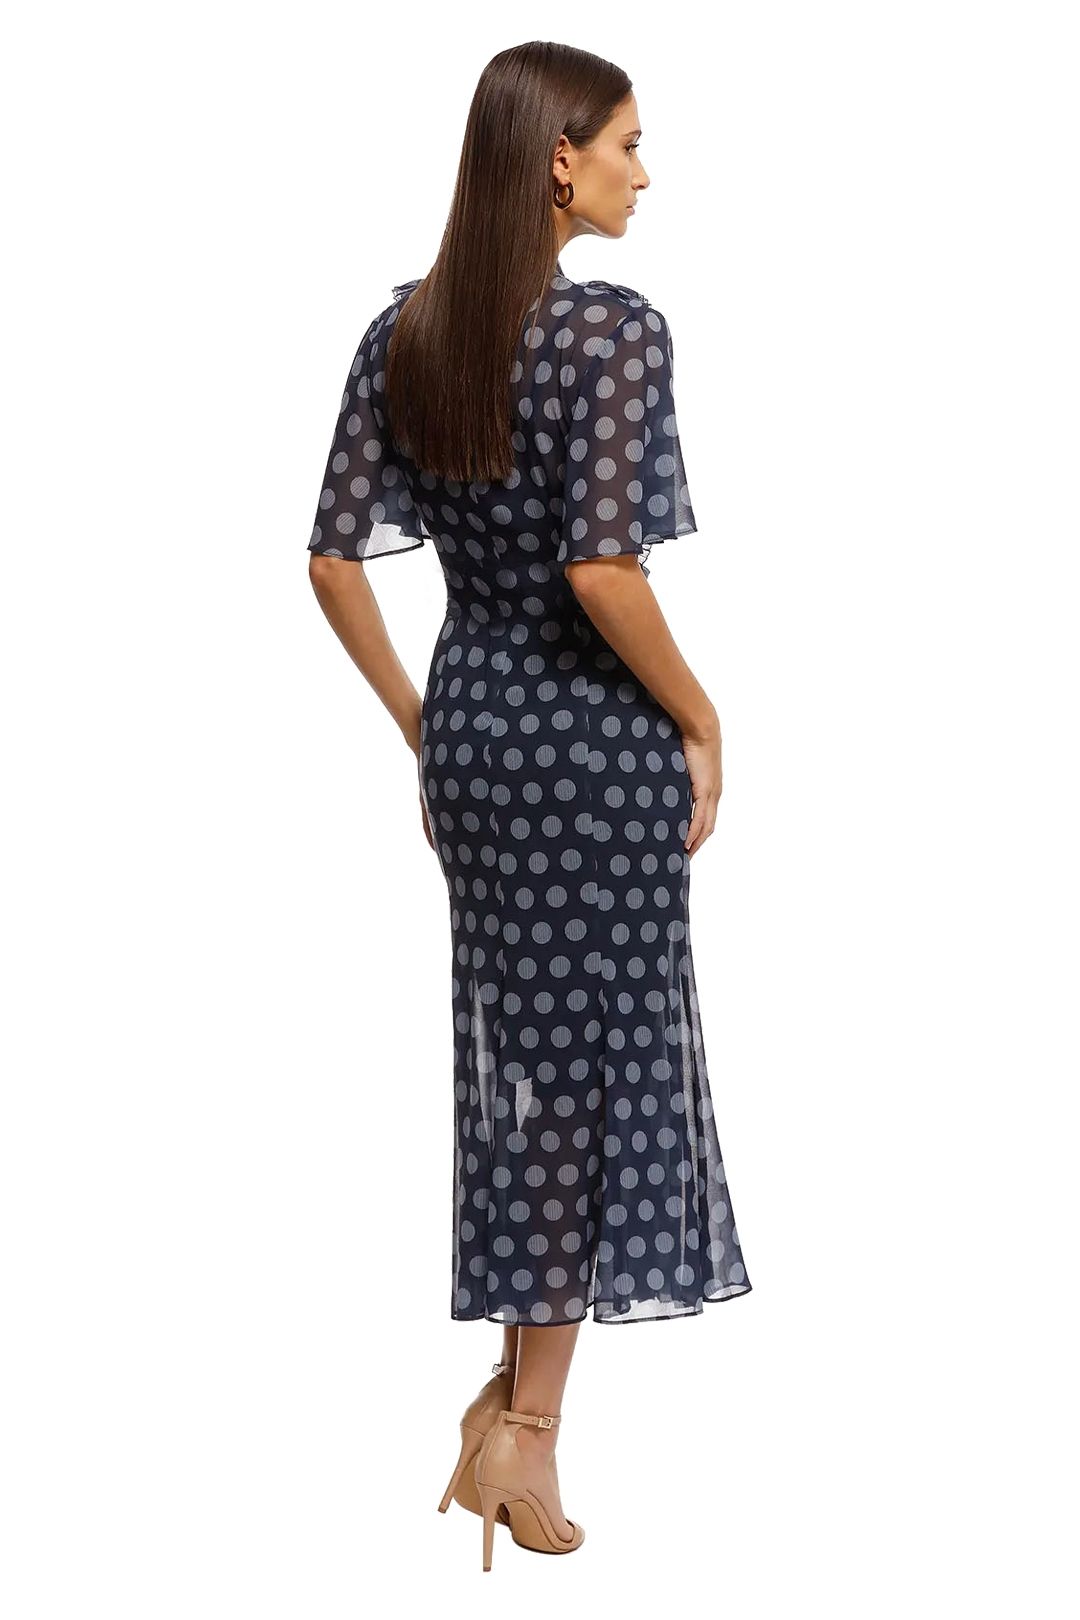 Passion Midi Dress in Midnight Polka Dot by Keepsake the Label for Rent